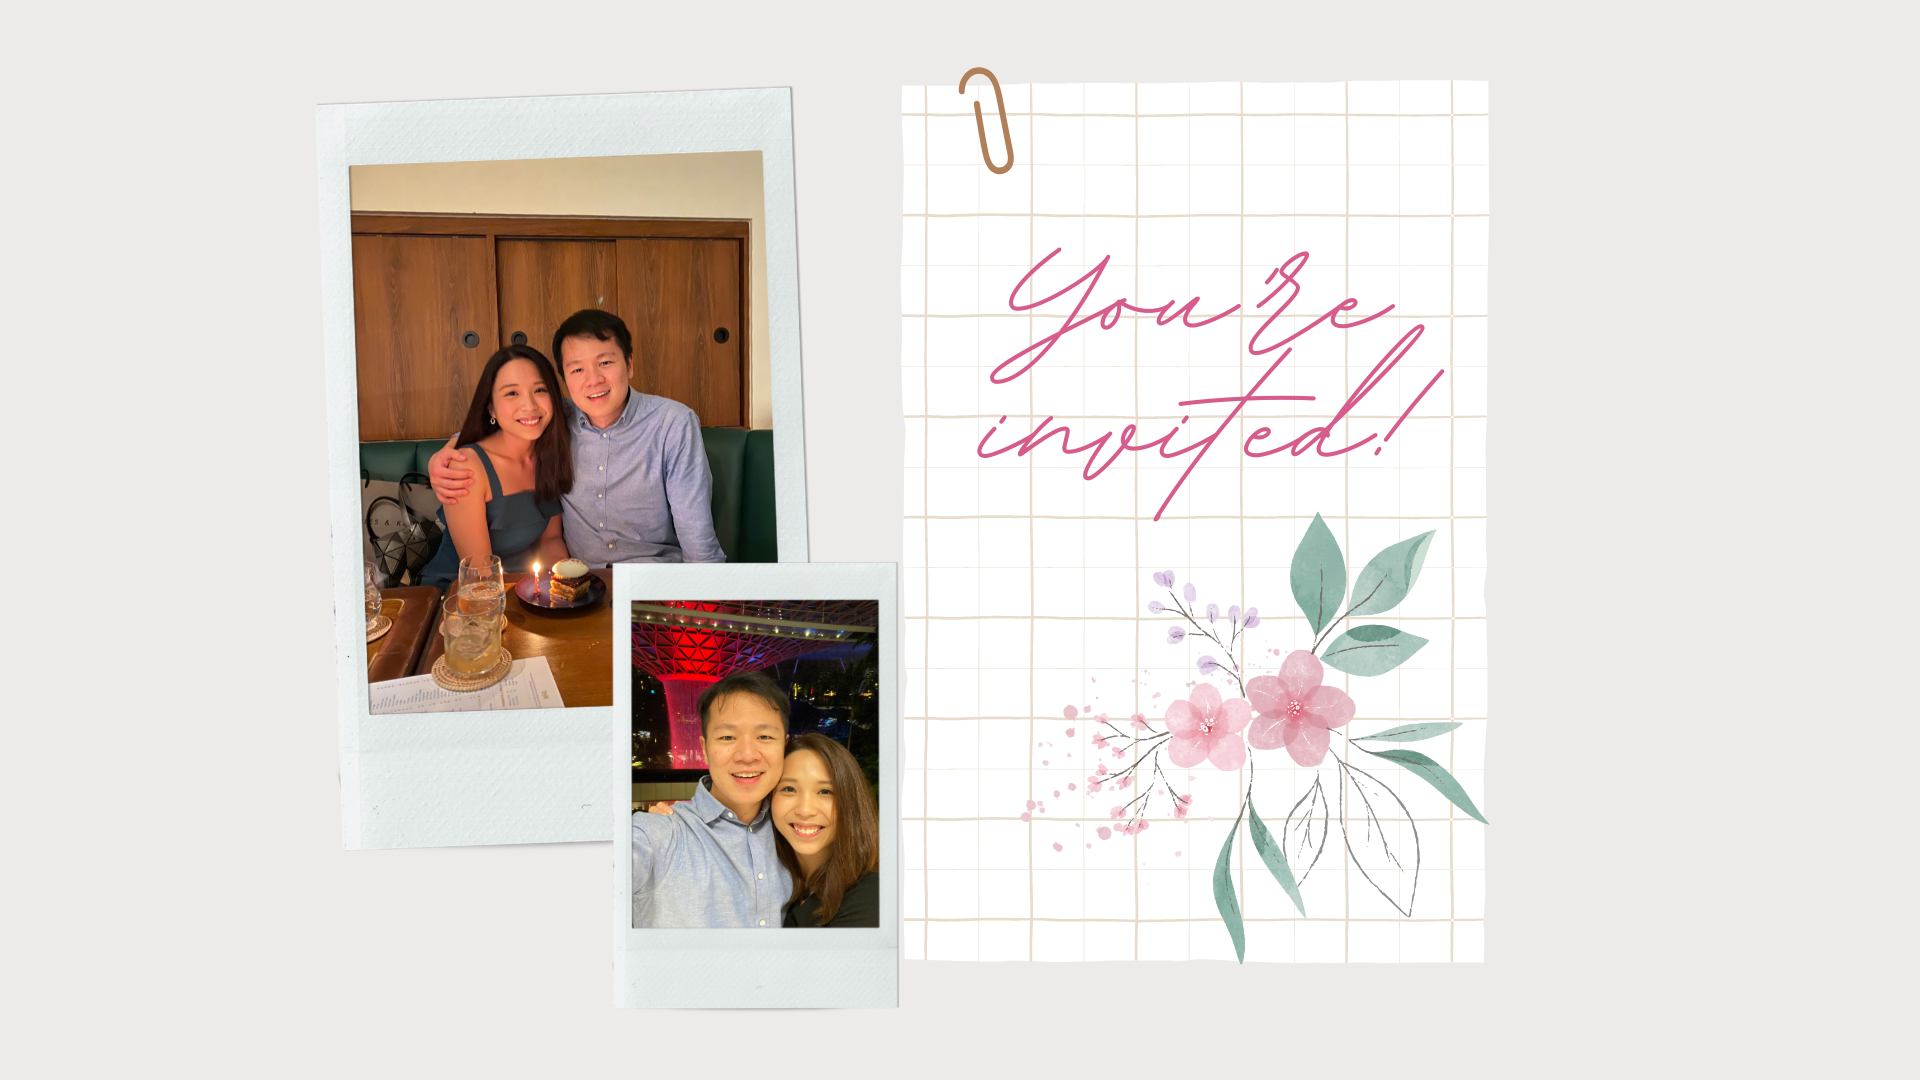 The Wedding Website of Vivien Ong and Andrew Yong